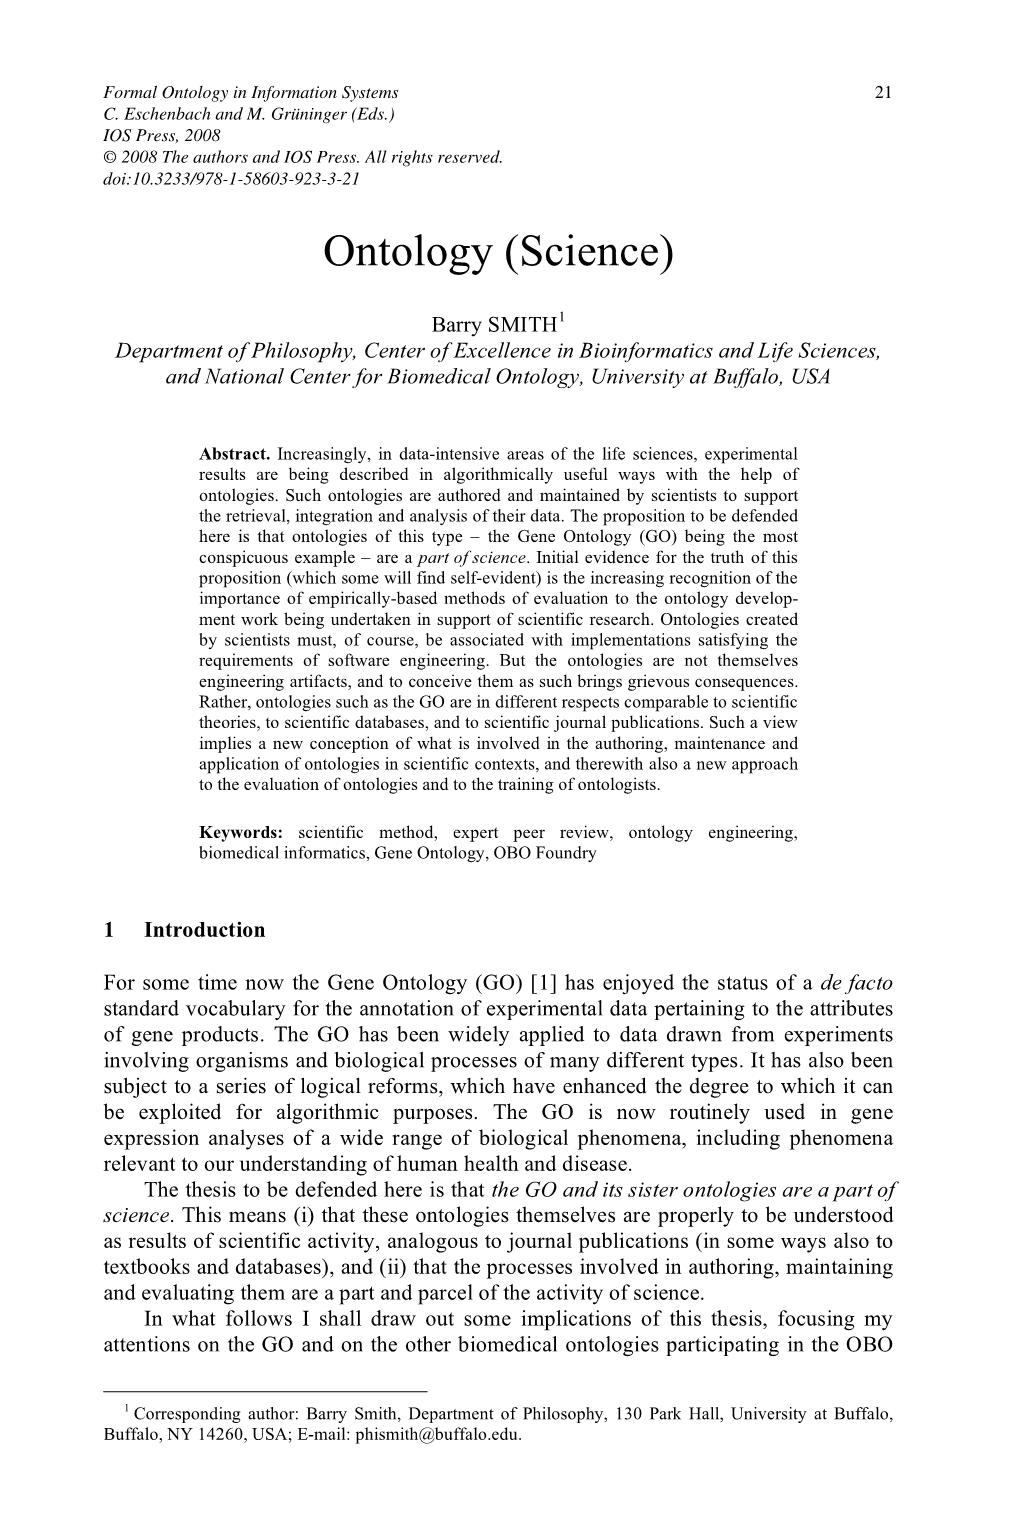 Ontology (Science)